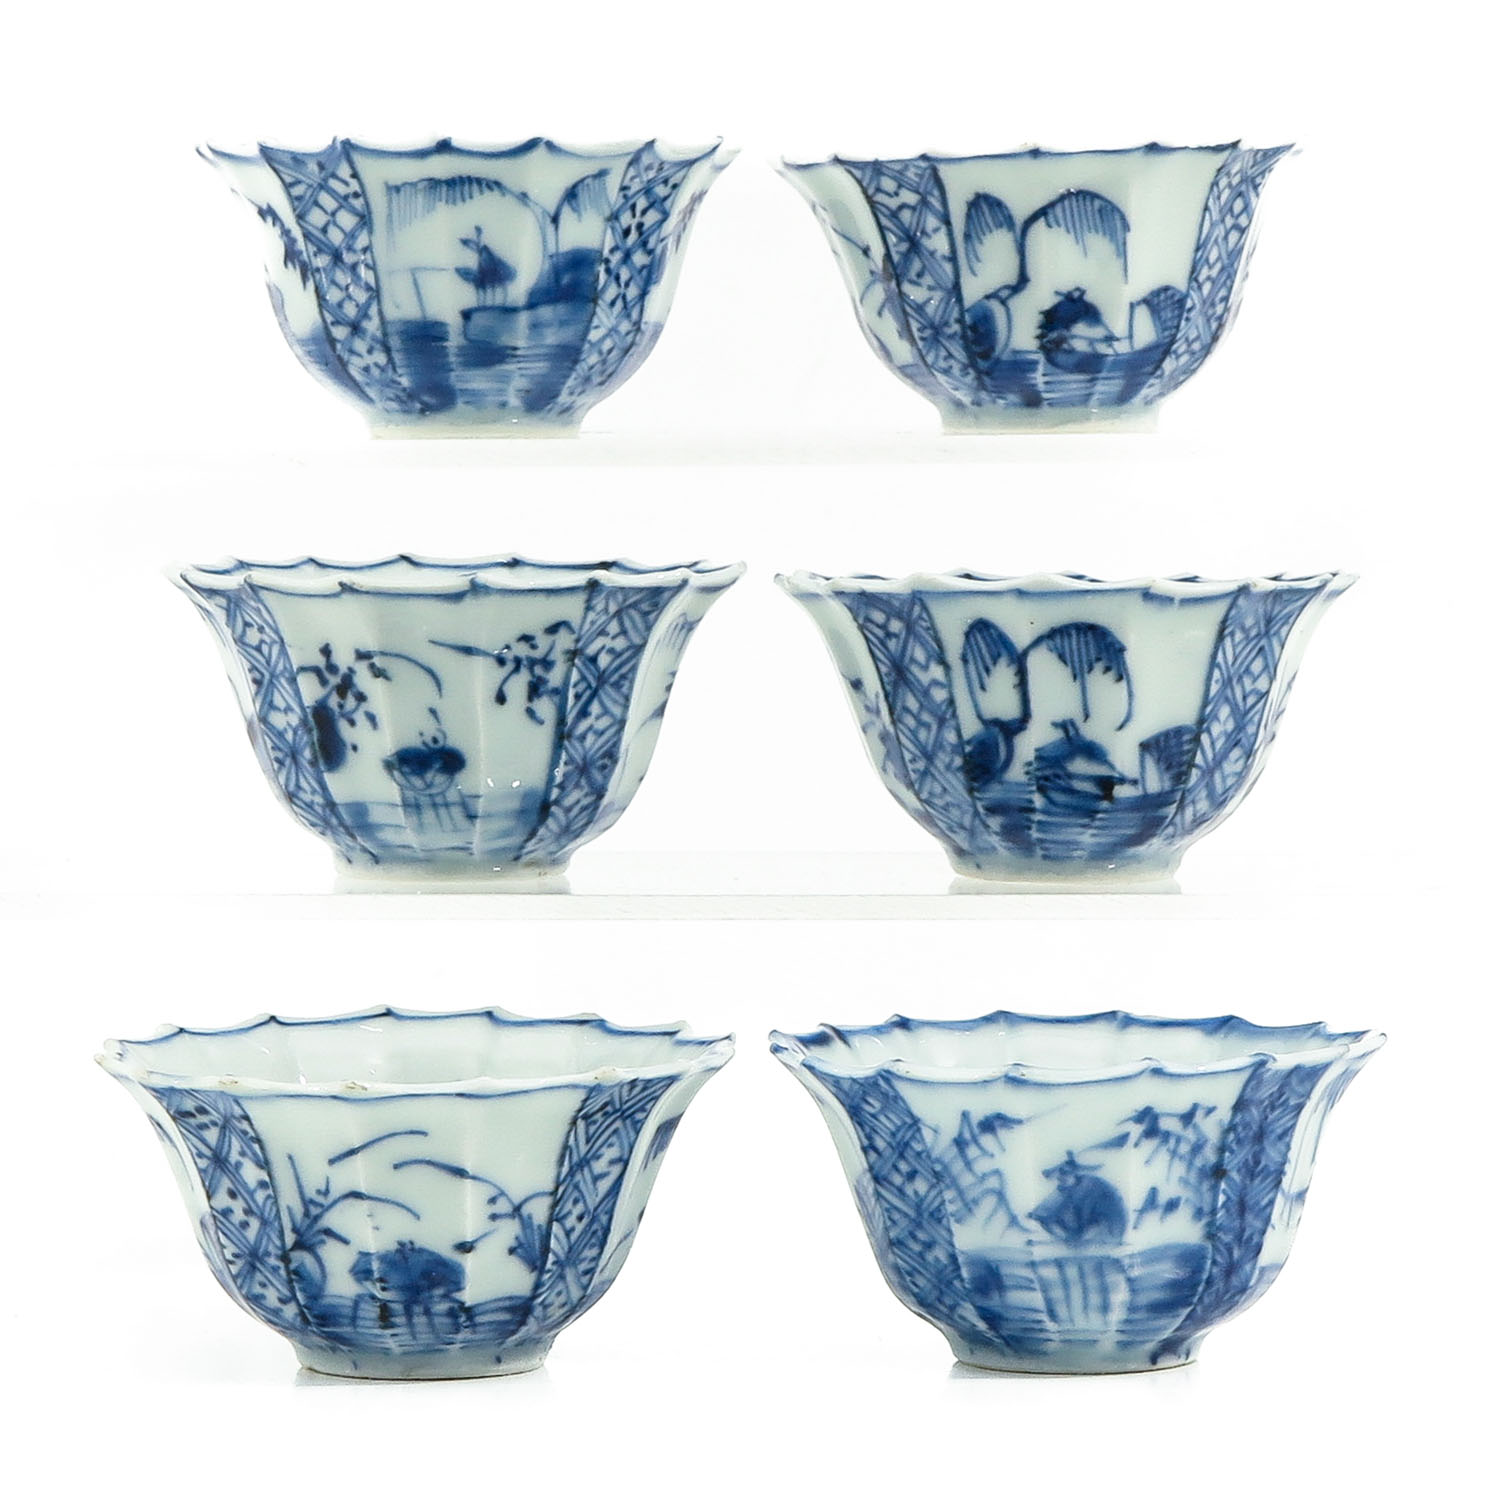 A Collection of 6 Cups and Saucers - Image 2 of 10